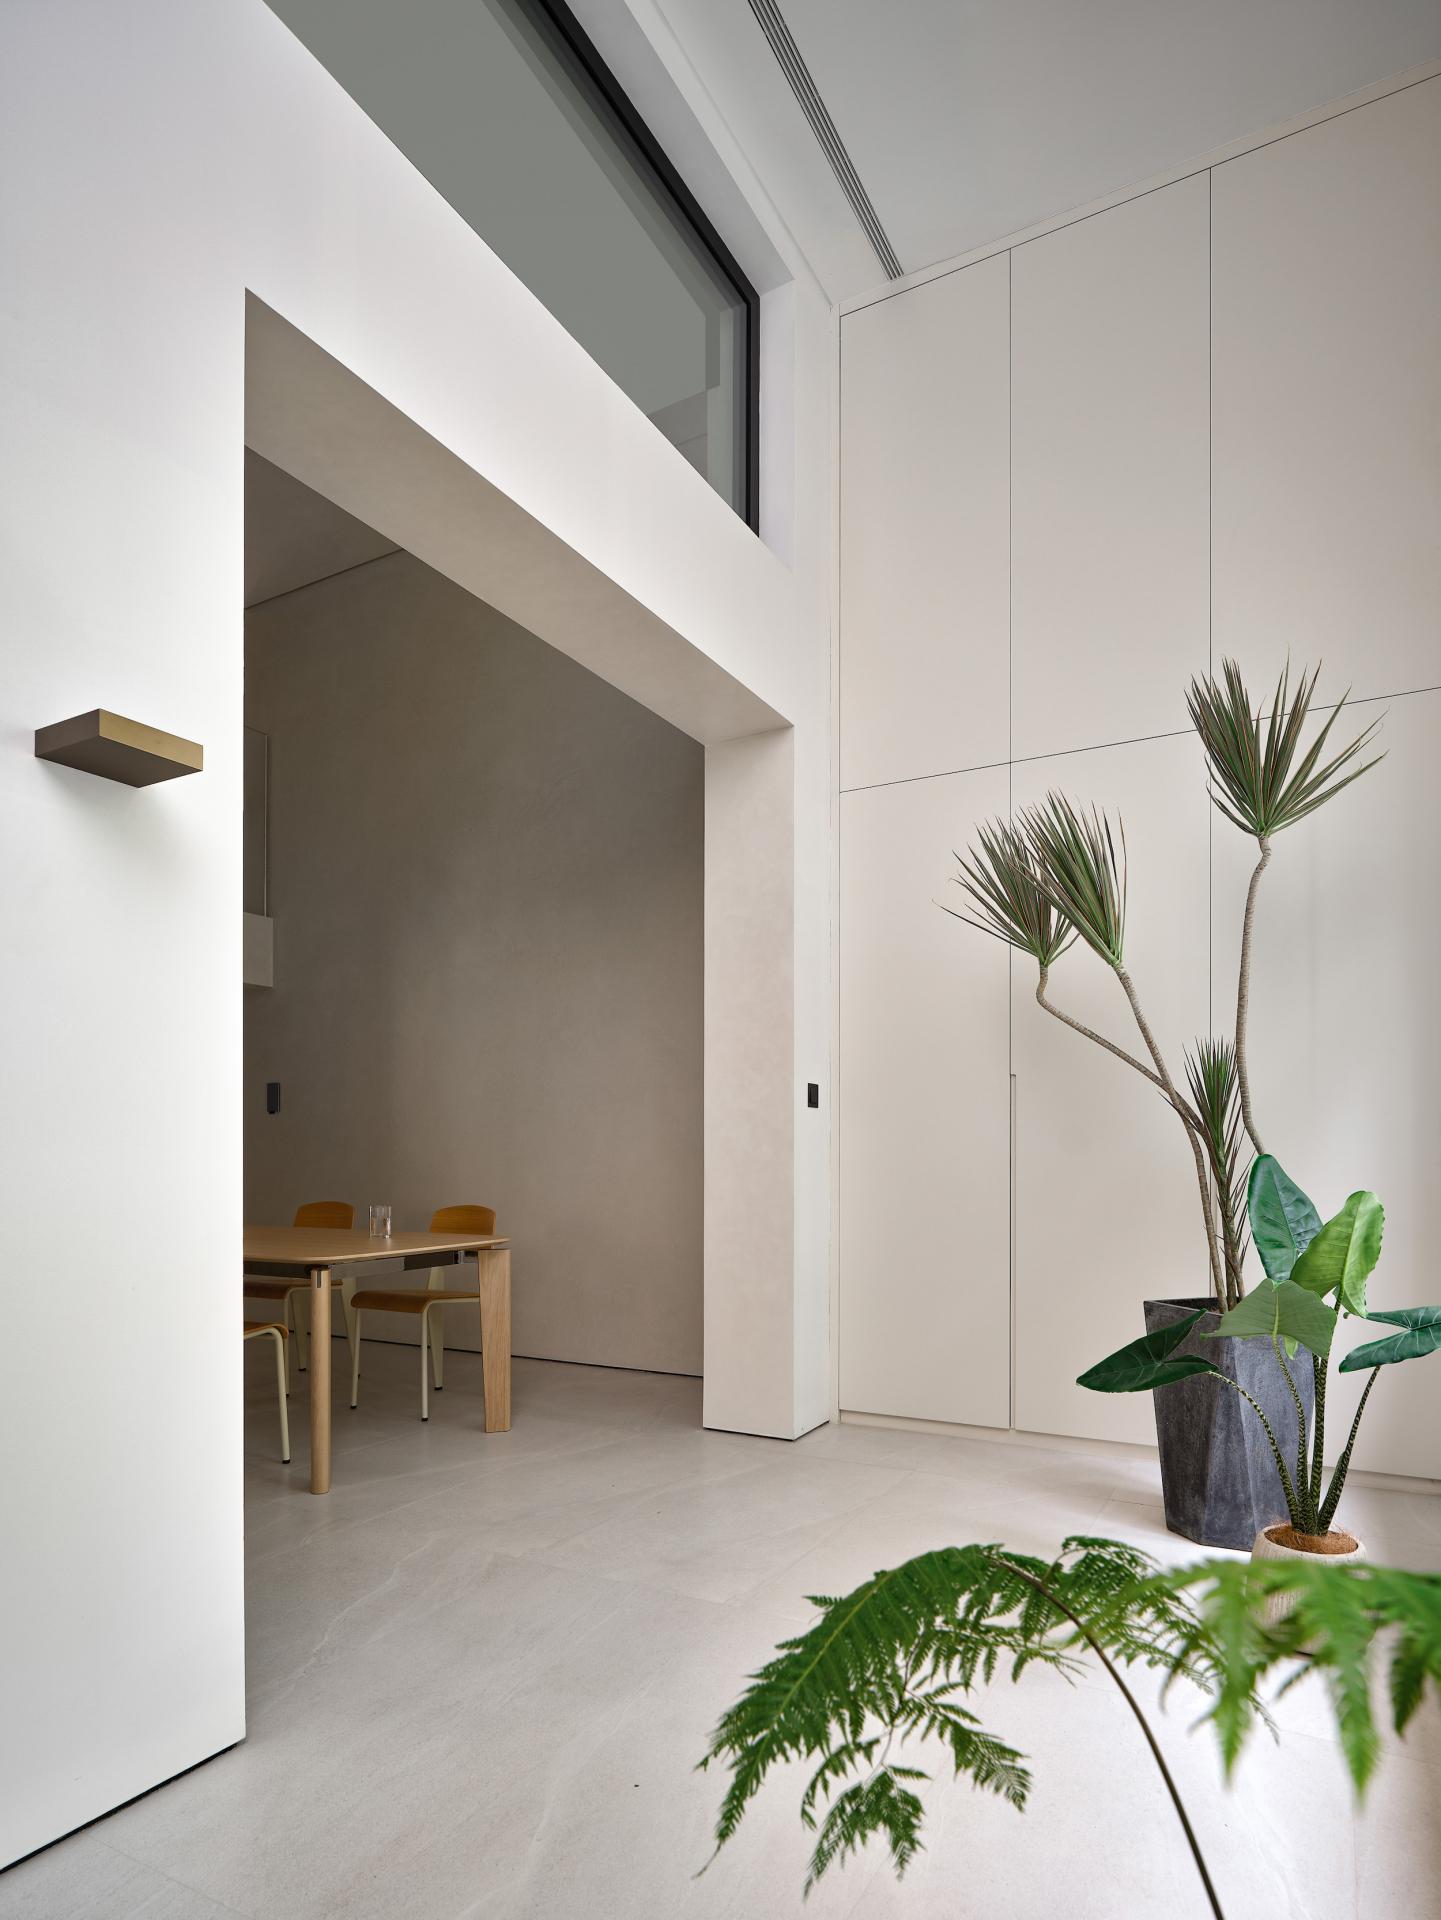 STUDIO8's 420 sqm Shanghai Apartment is a Harmonious Balance Between Personal Space and Family Togetherness